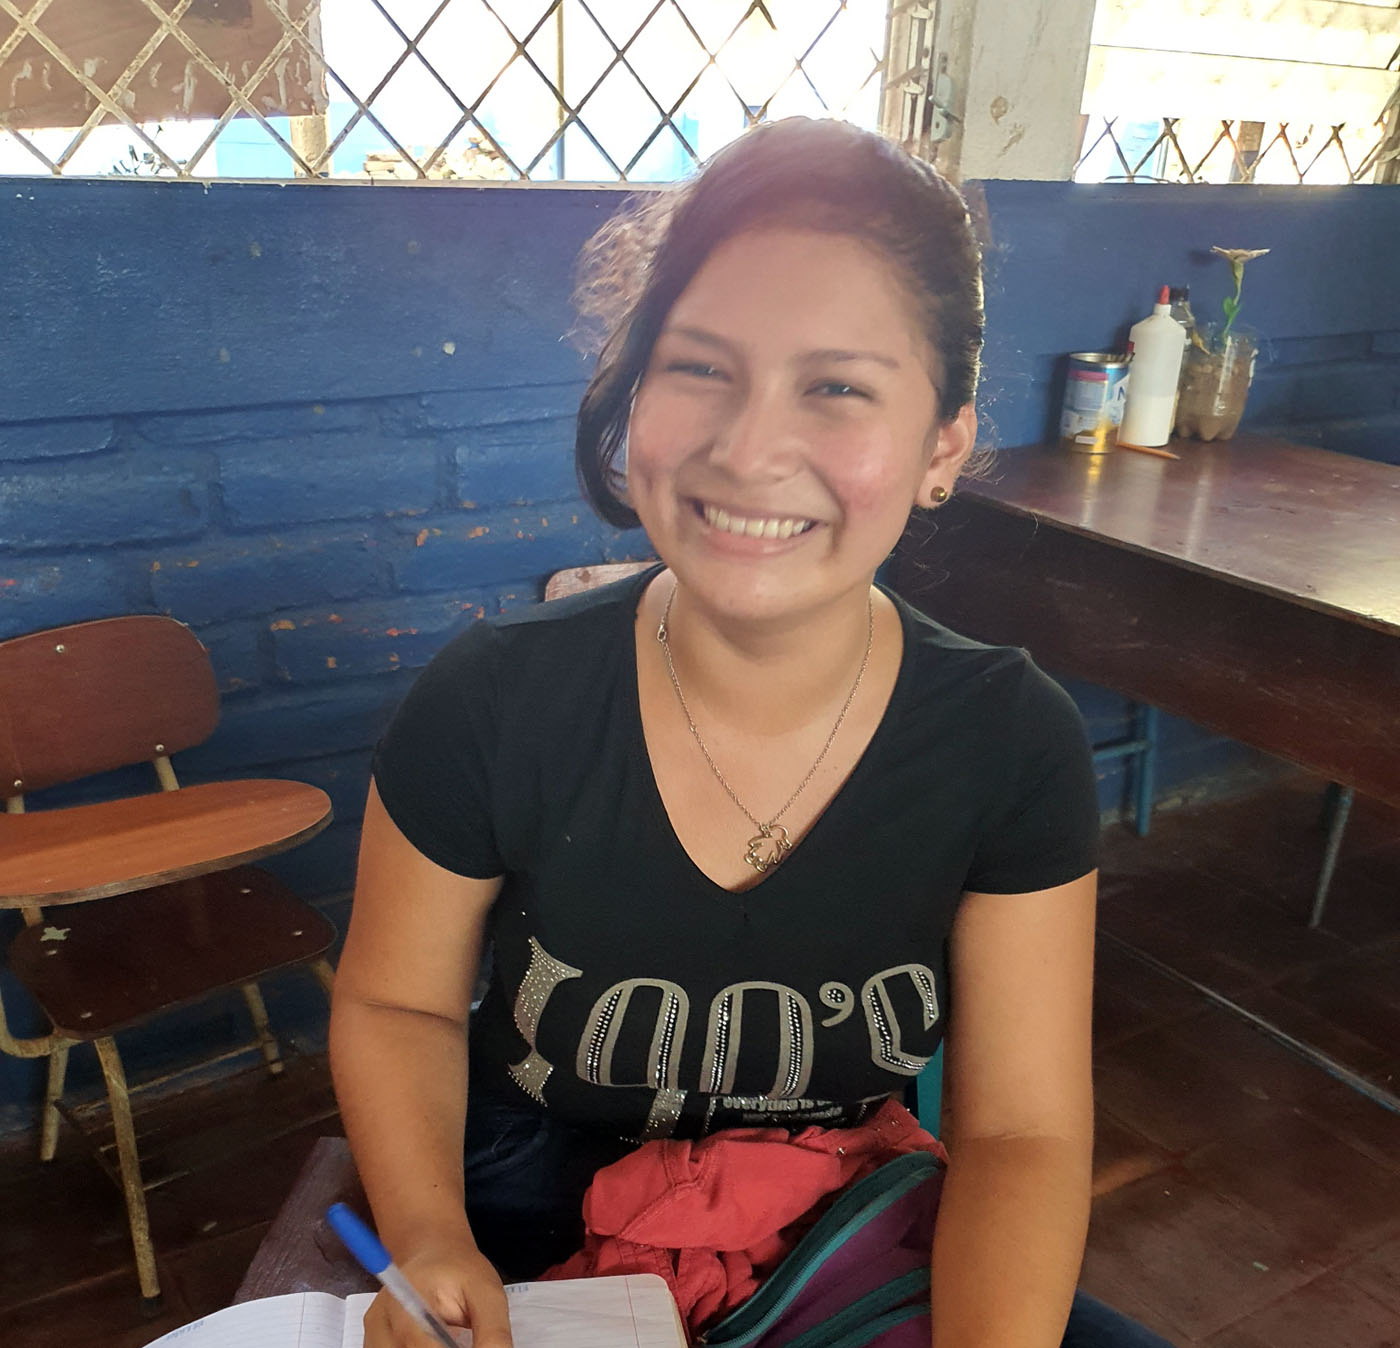 Yanelis Lopez was first introduced to Unity 4 Orphans when her aunt, who knew she wanted to study English, heard about Unity 4 Orphans’ ESL program